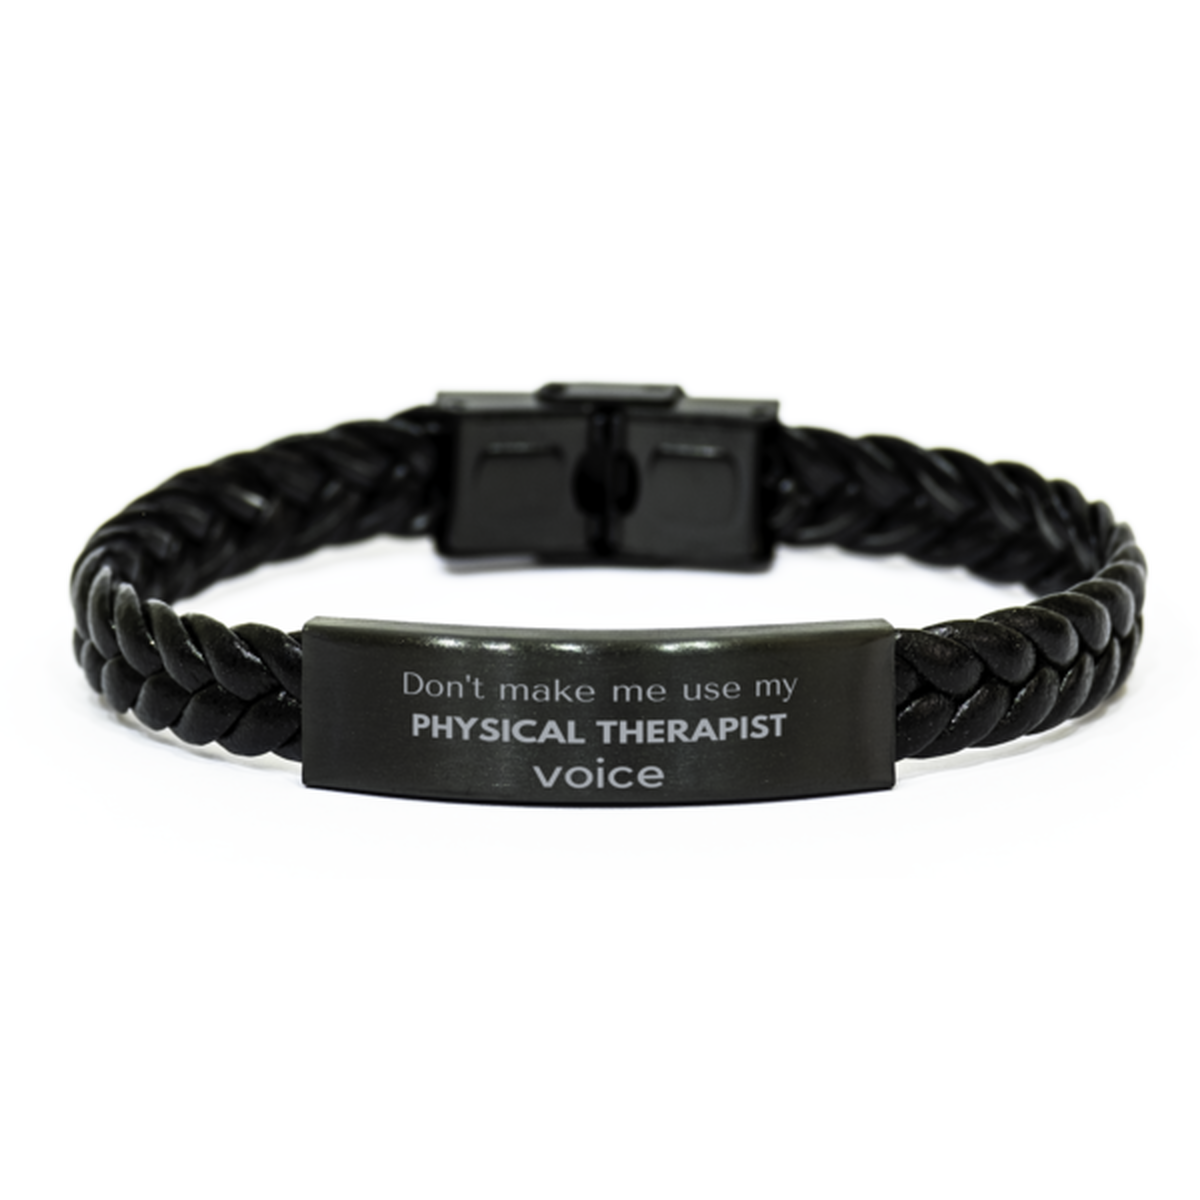 Don't make me use my Physical Therapist voice, Sarcasm Physical Therapist Gifts, Christmas Physical Therapist Braided Leather Bracelet Birthday Unique Gifts For Physical Therapist Coworkers, Men, Women, Colleague, Friends